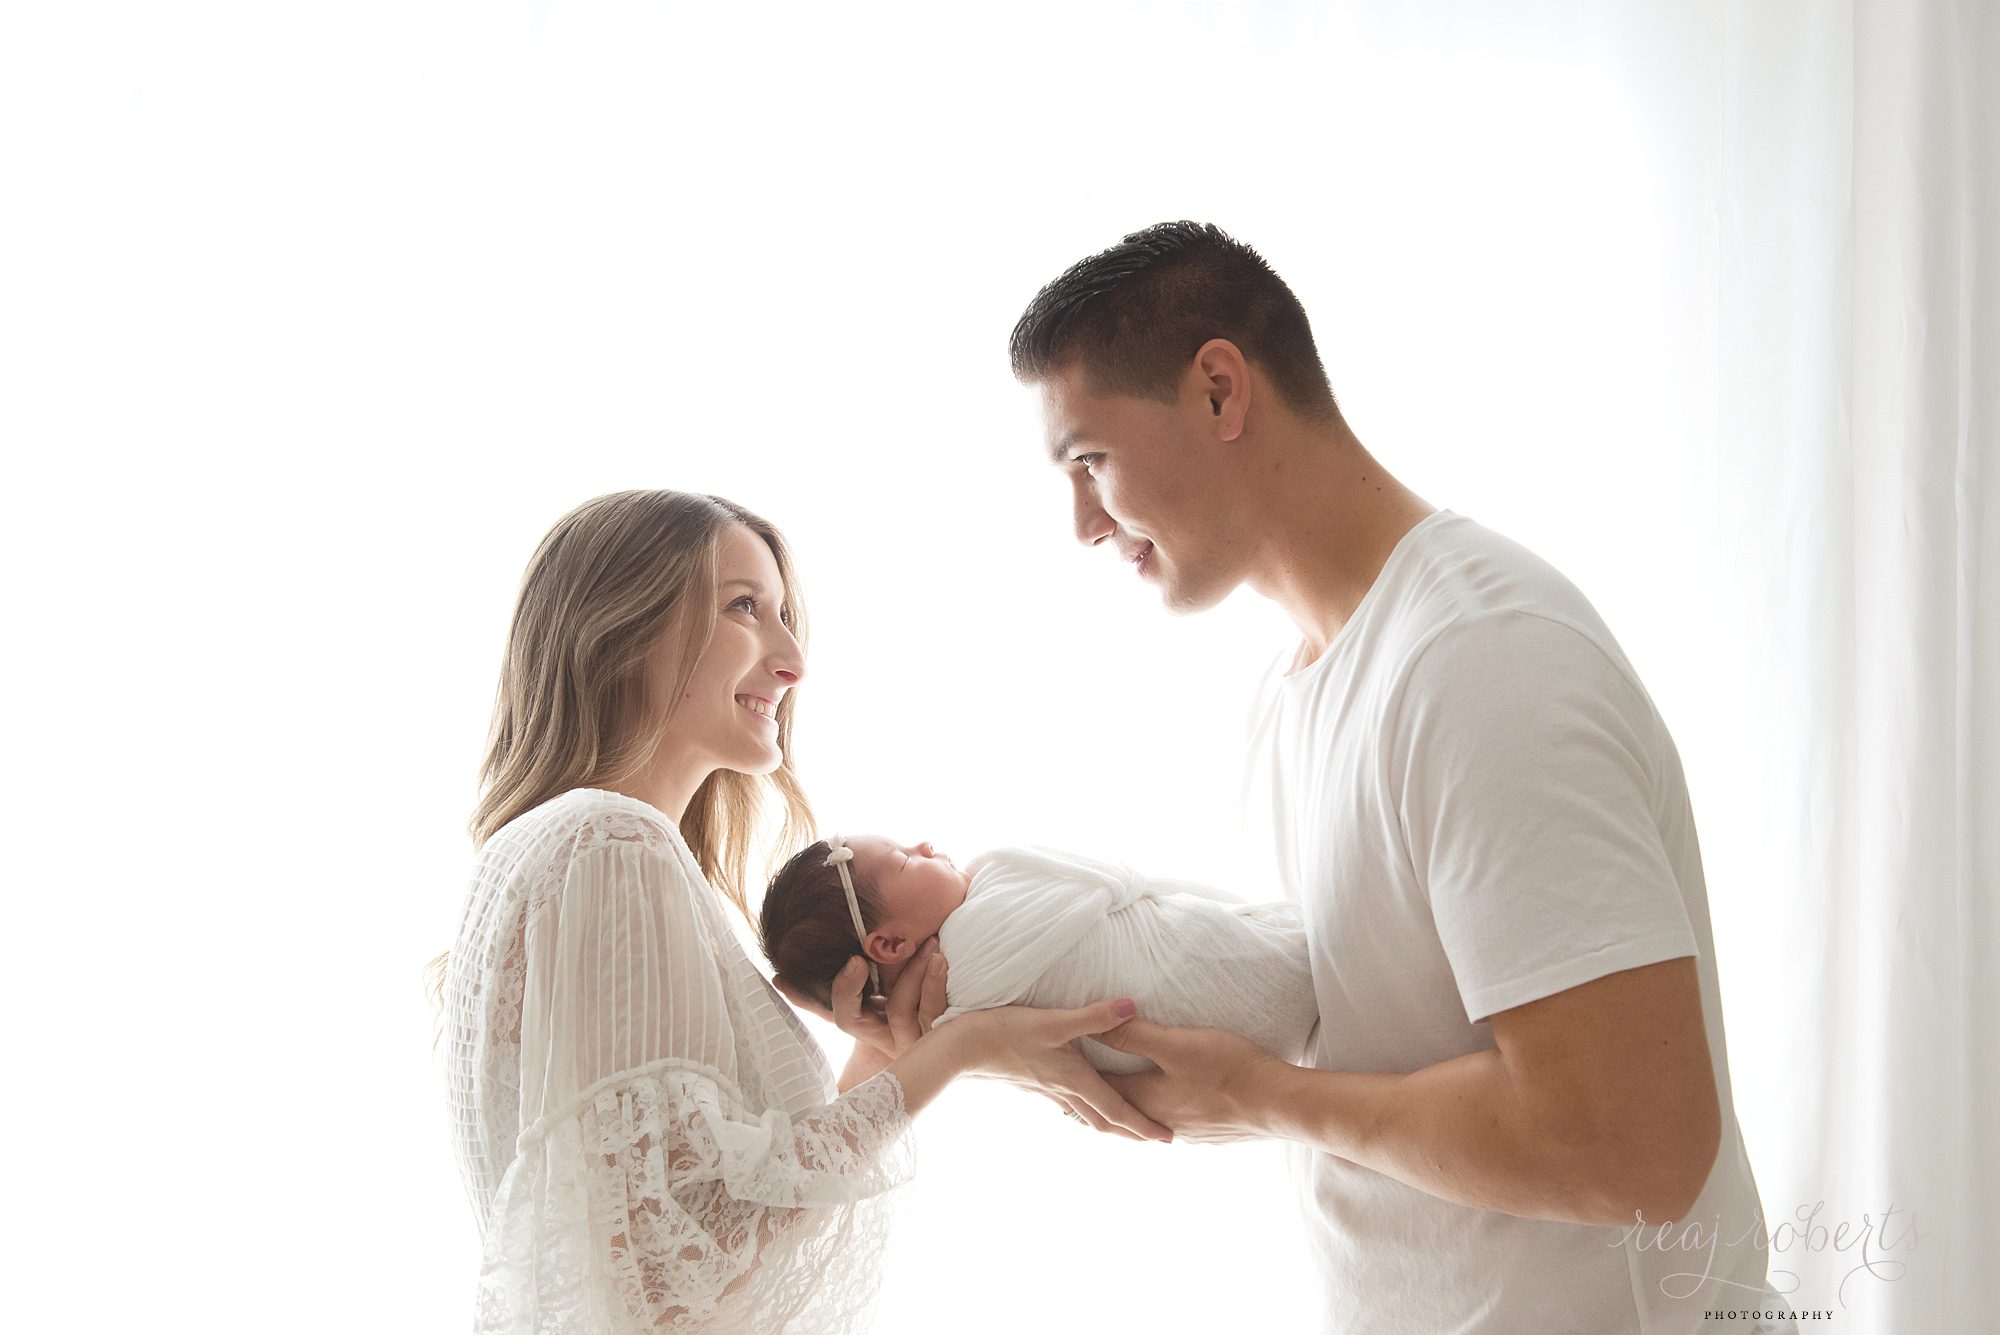 Chandler Baby Photographer | Reaj Roberts Photography | happy parents holding newborn in front of window